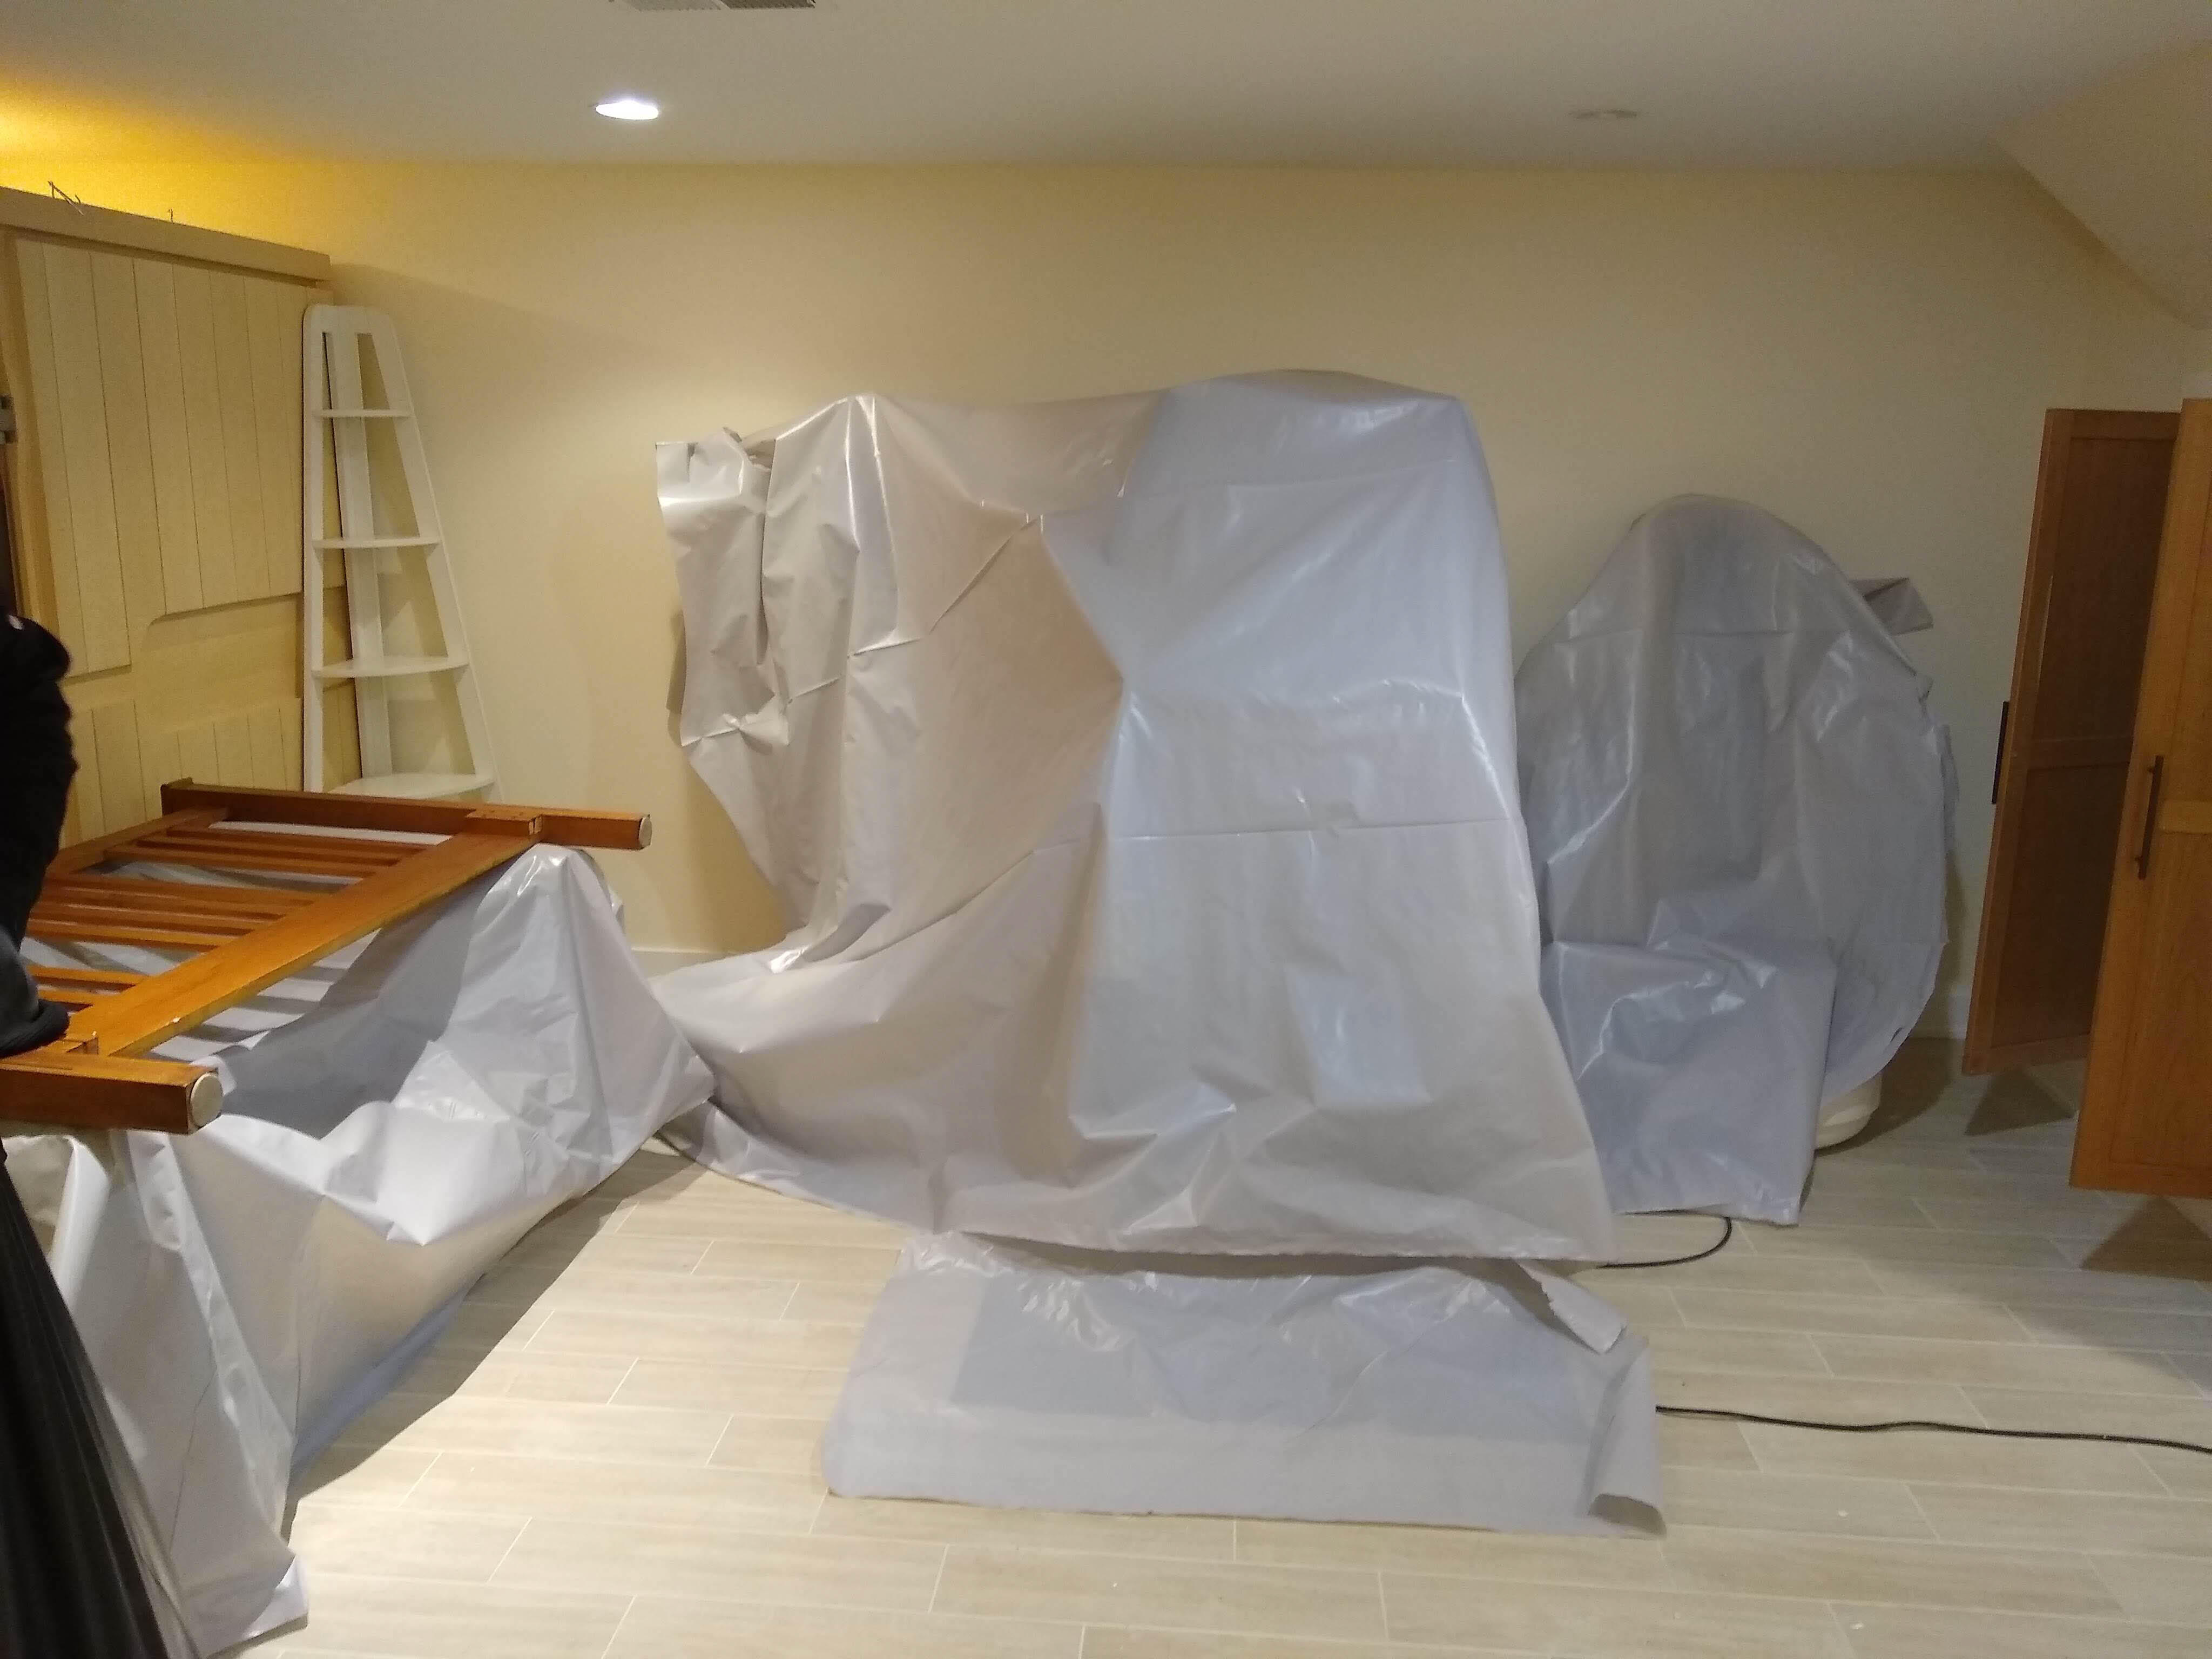 While every water damage situation is different, the process our professionals adhere to stays consistent. Our specialists make sure your belongings are secure while restoring the damaged area.